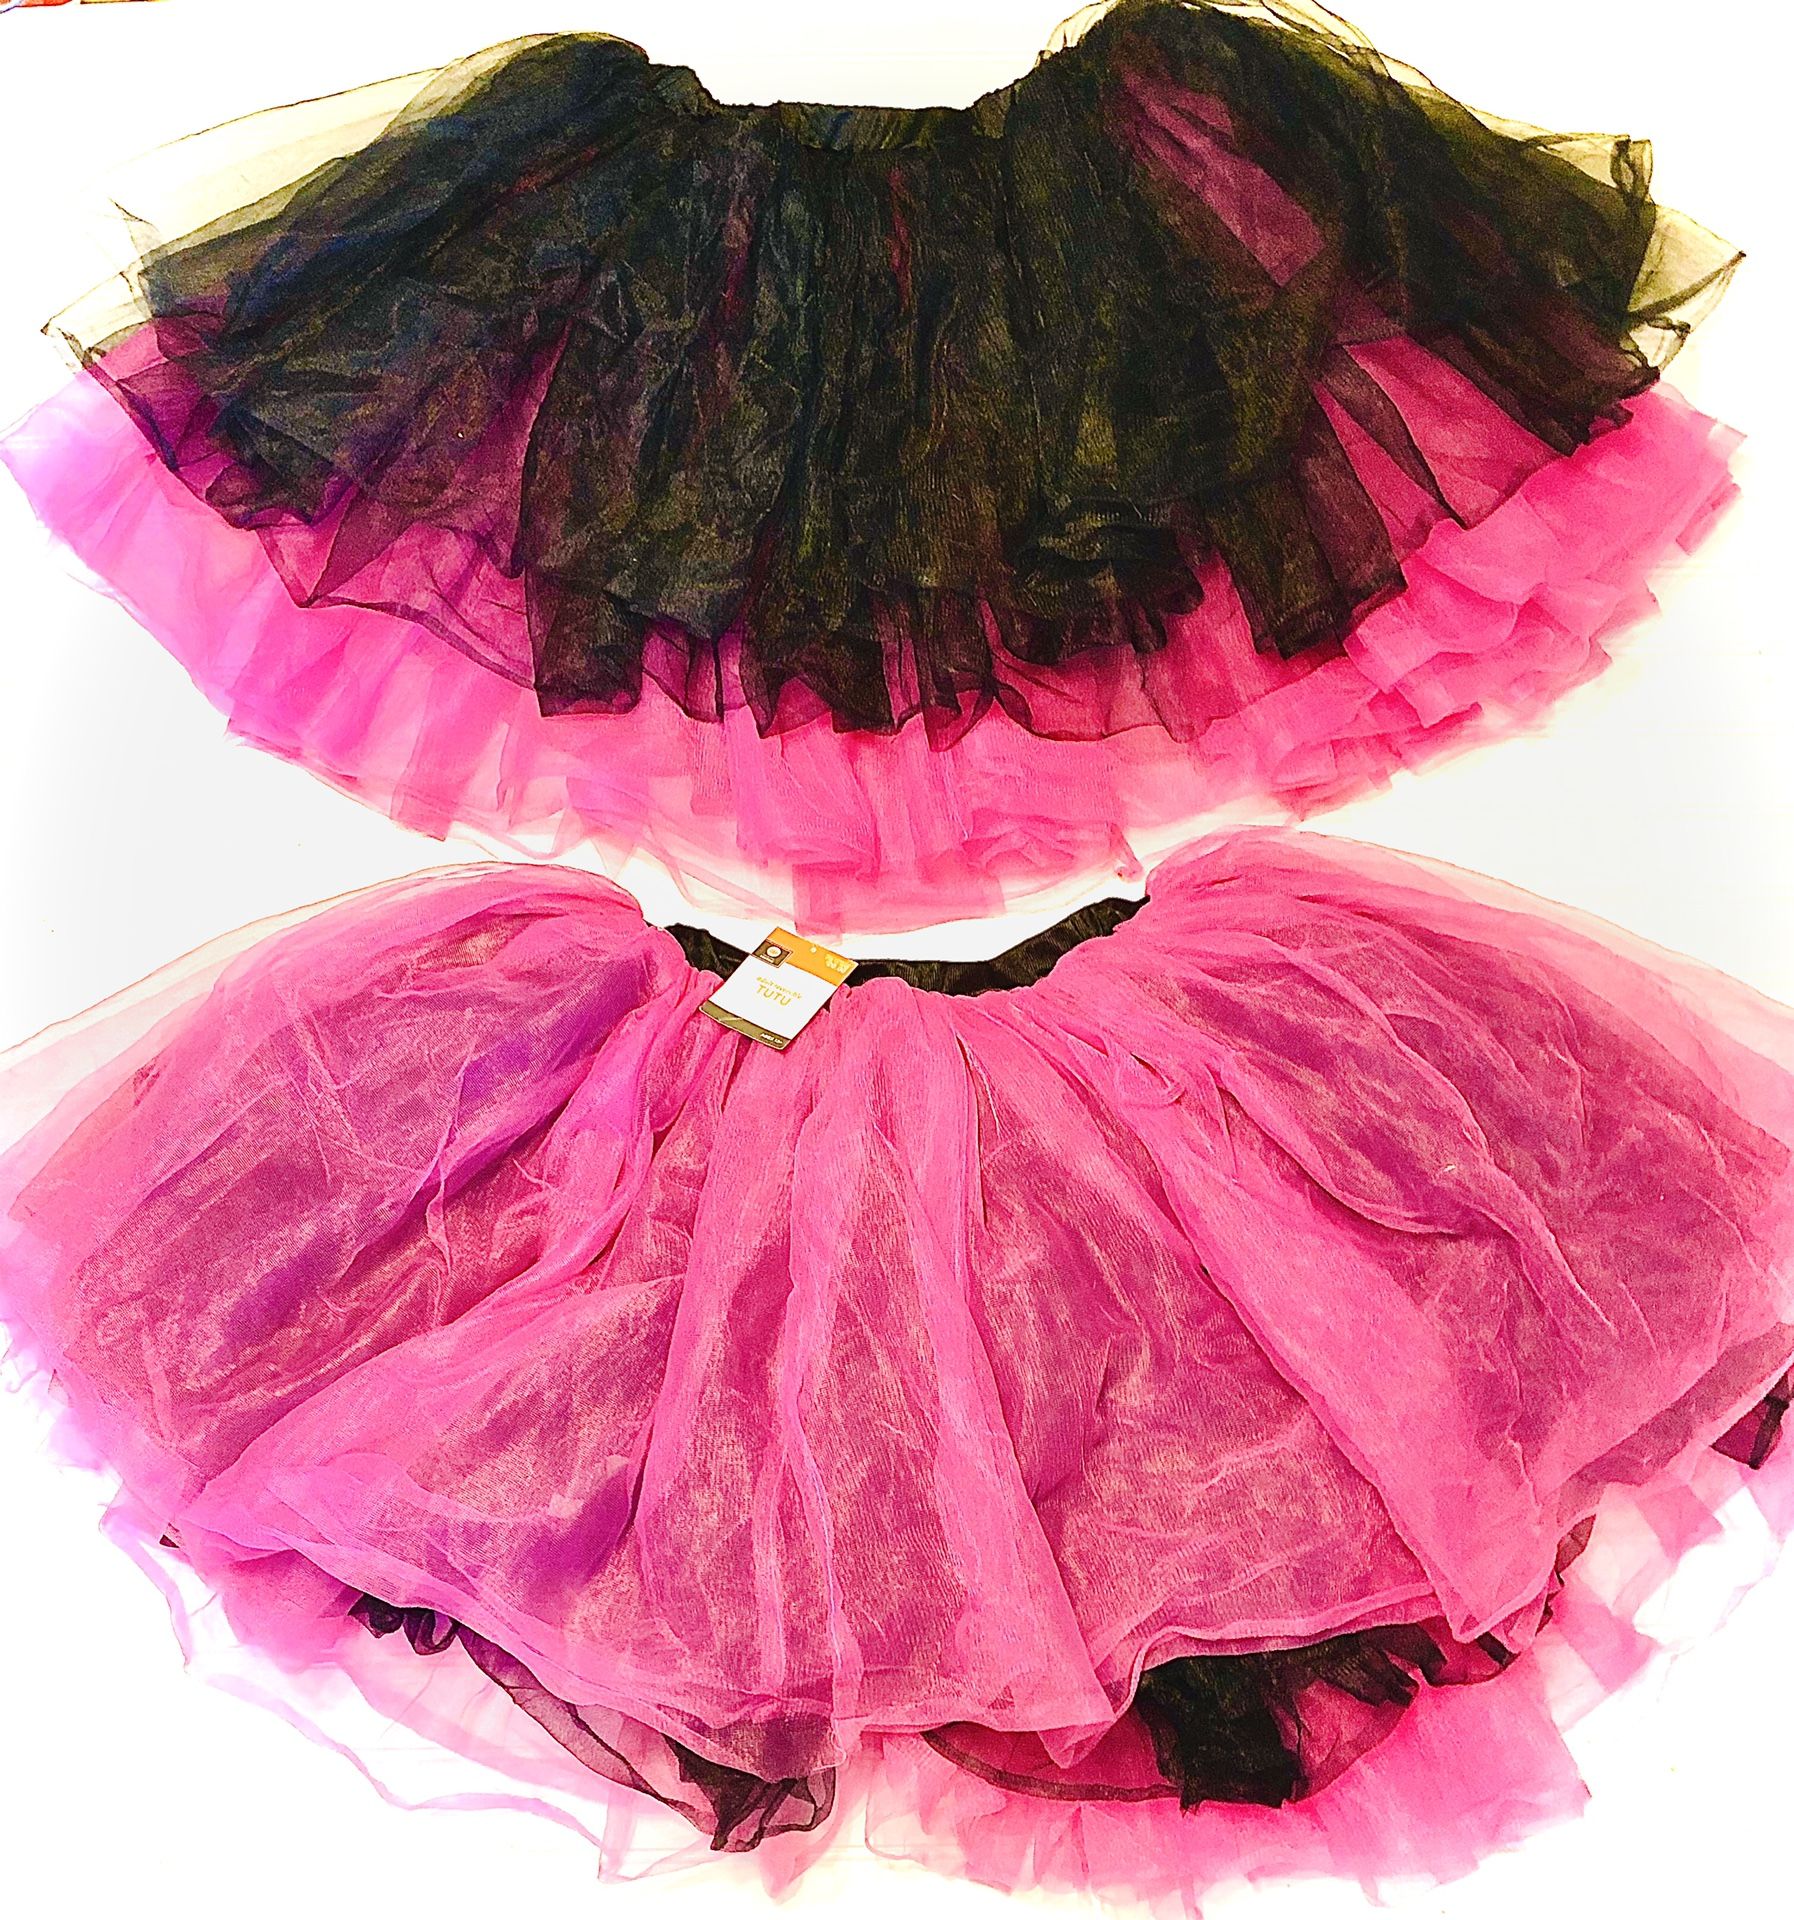 2 Tutus! Hot Pink & Black Reversible, Adult one size fits most.